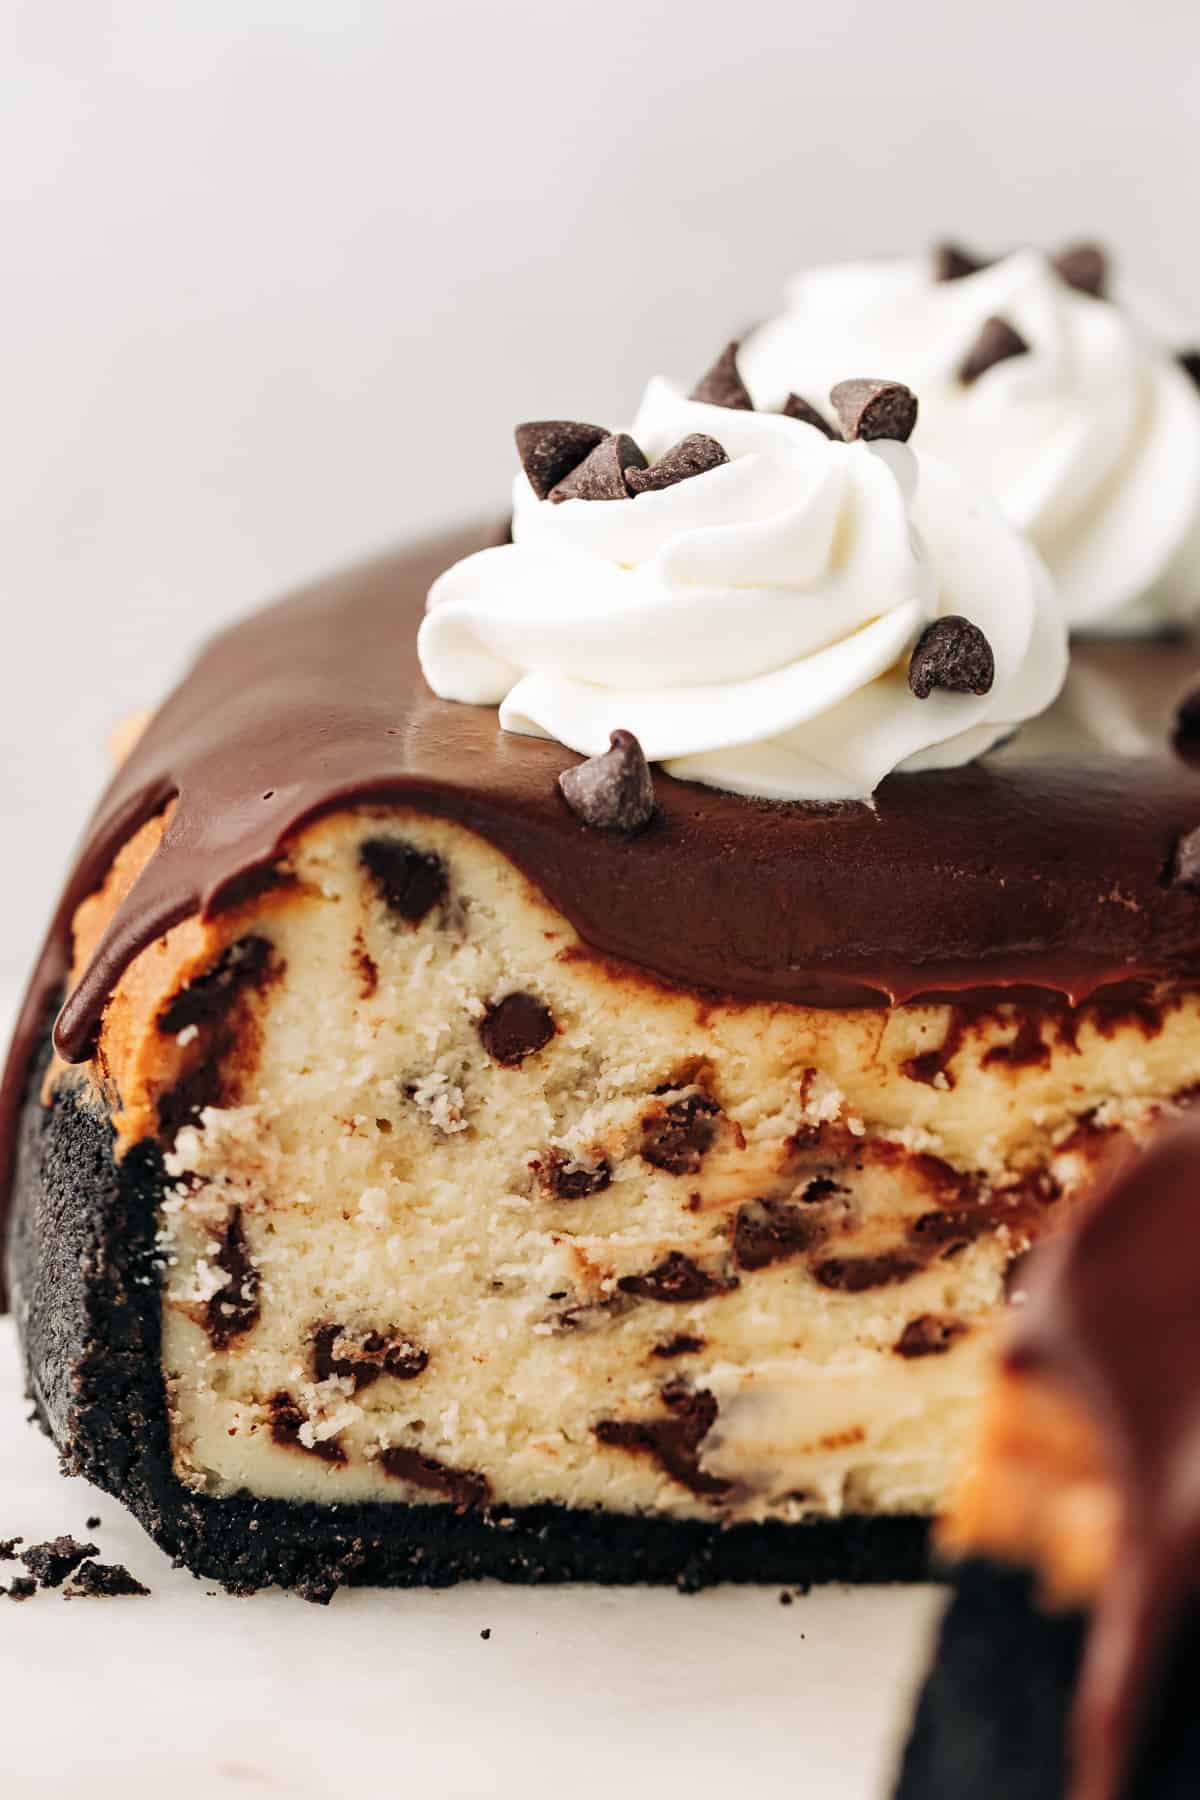 inside of a chocolate chip cheesecake.